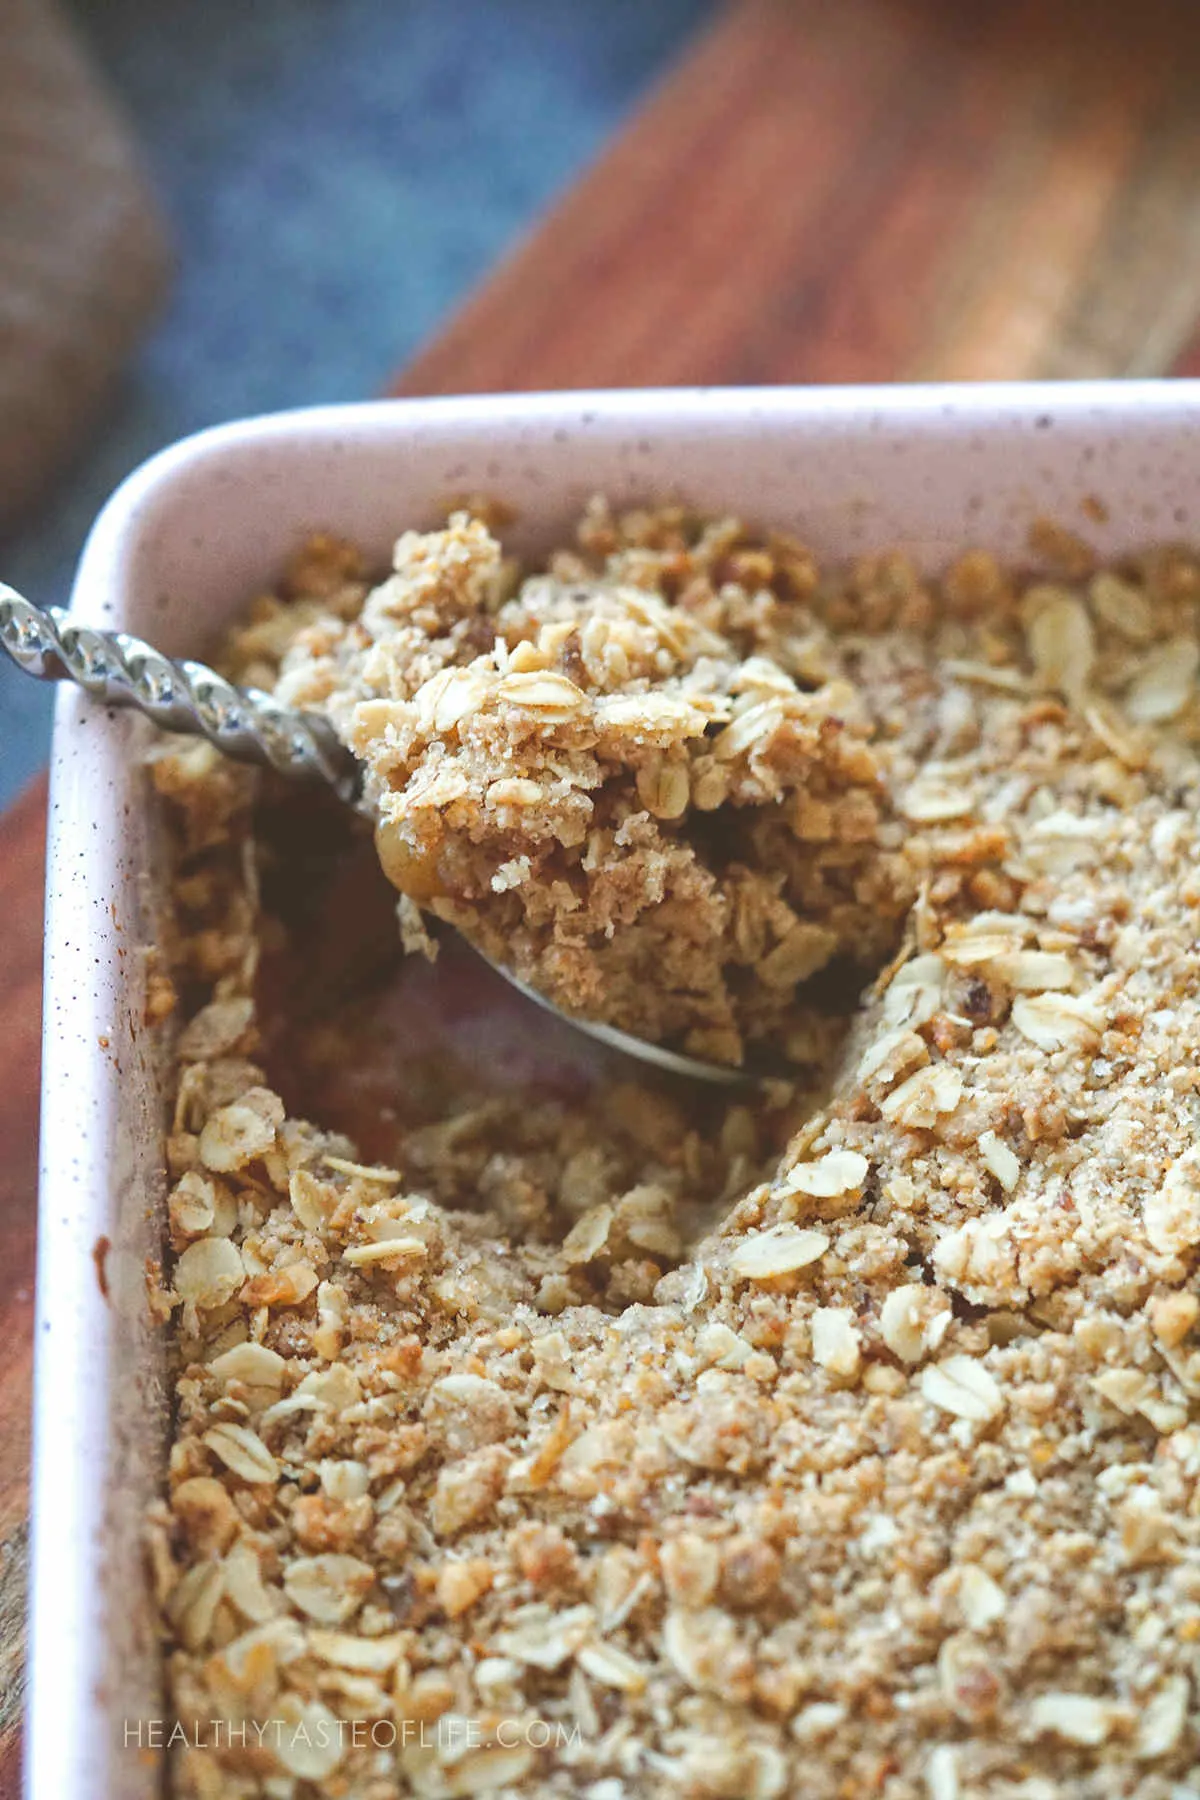 Oat crumble topping baked with apples.